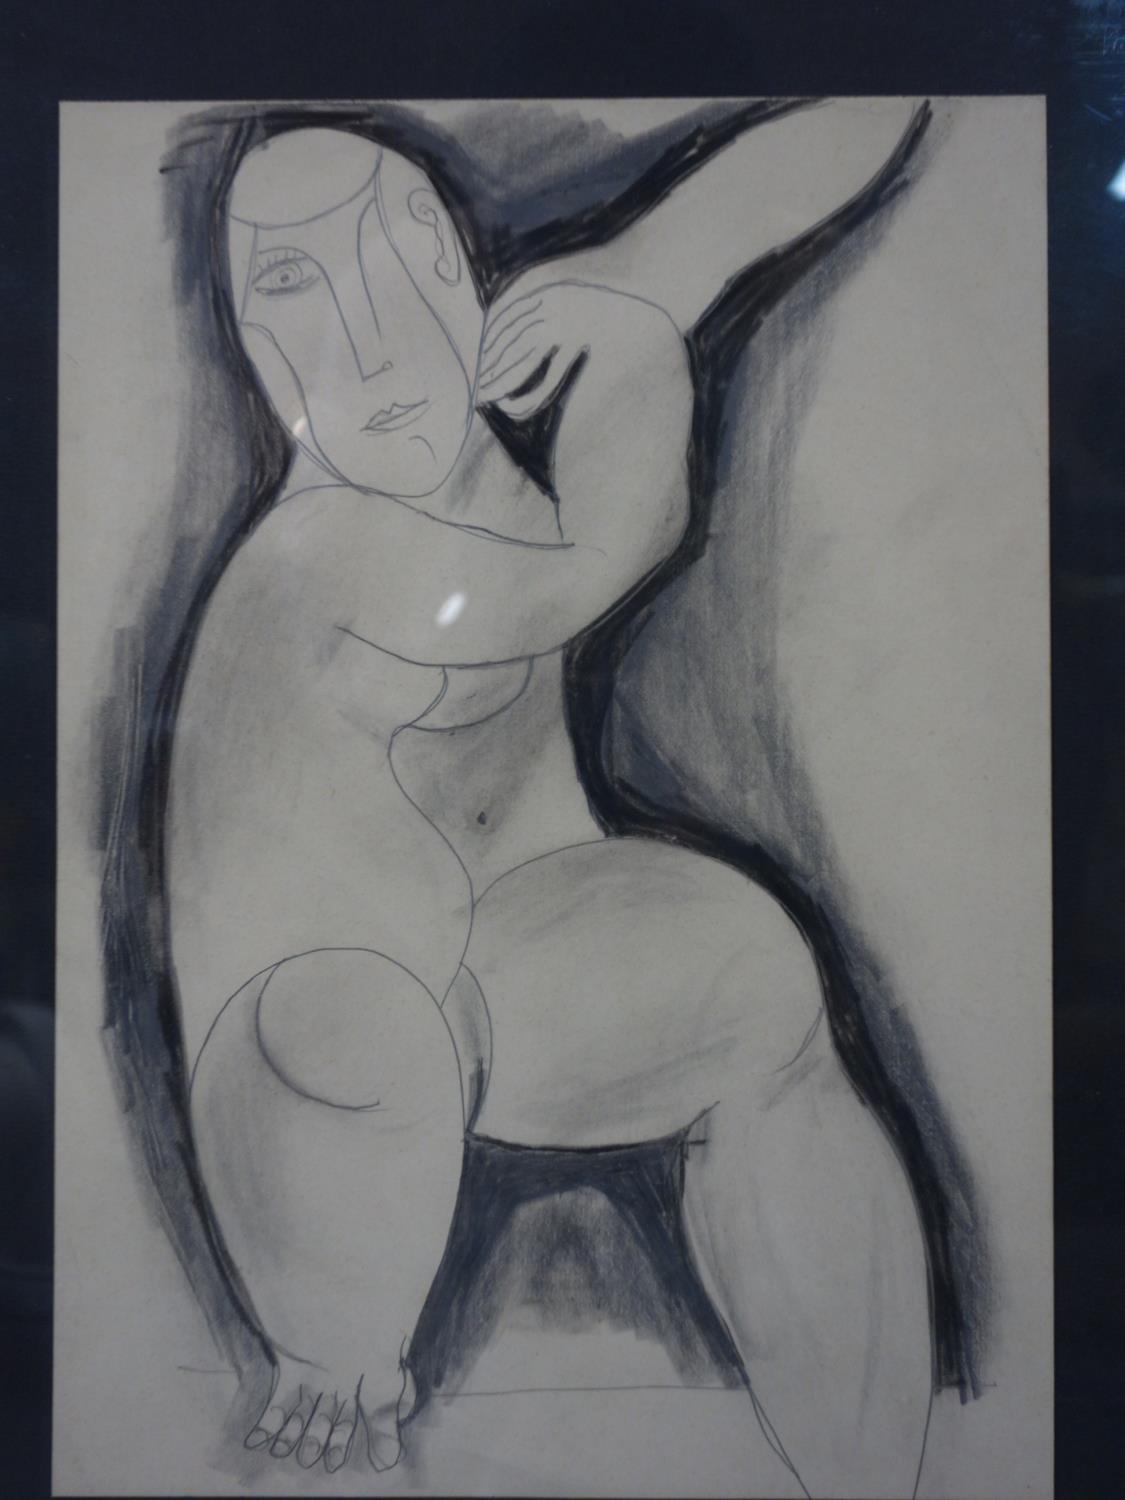 A 20th century pencil and crayon sketch of an abstract nude, unsigned, 30 x 21cm